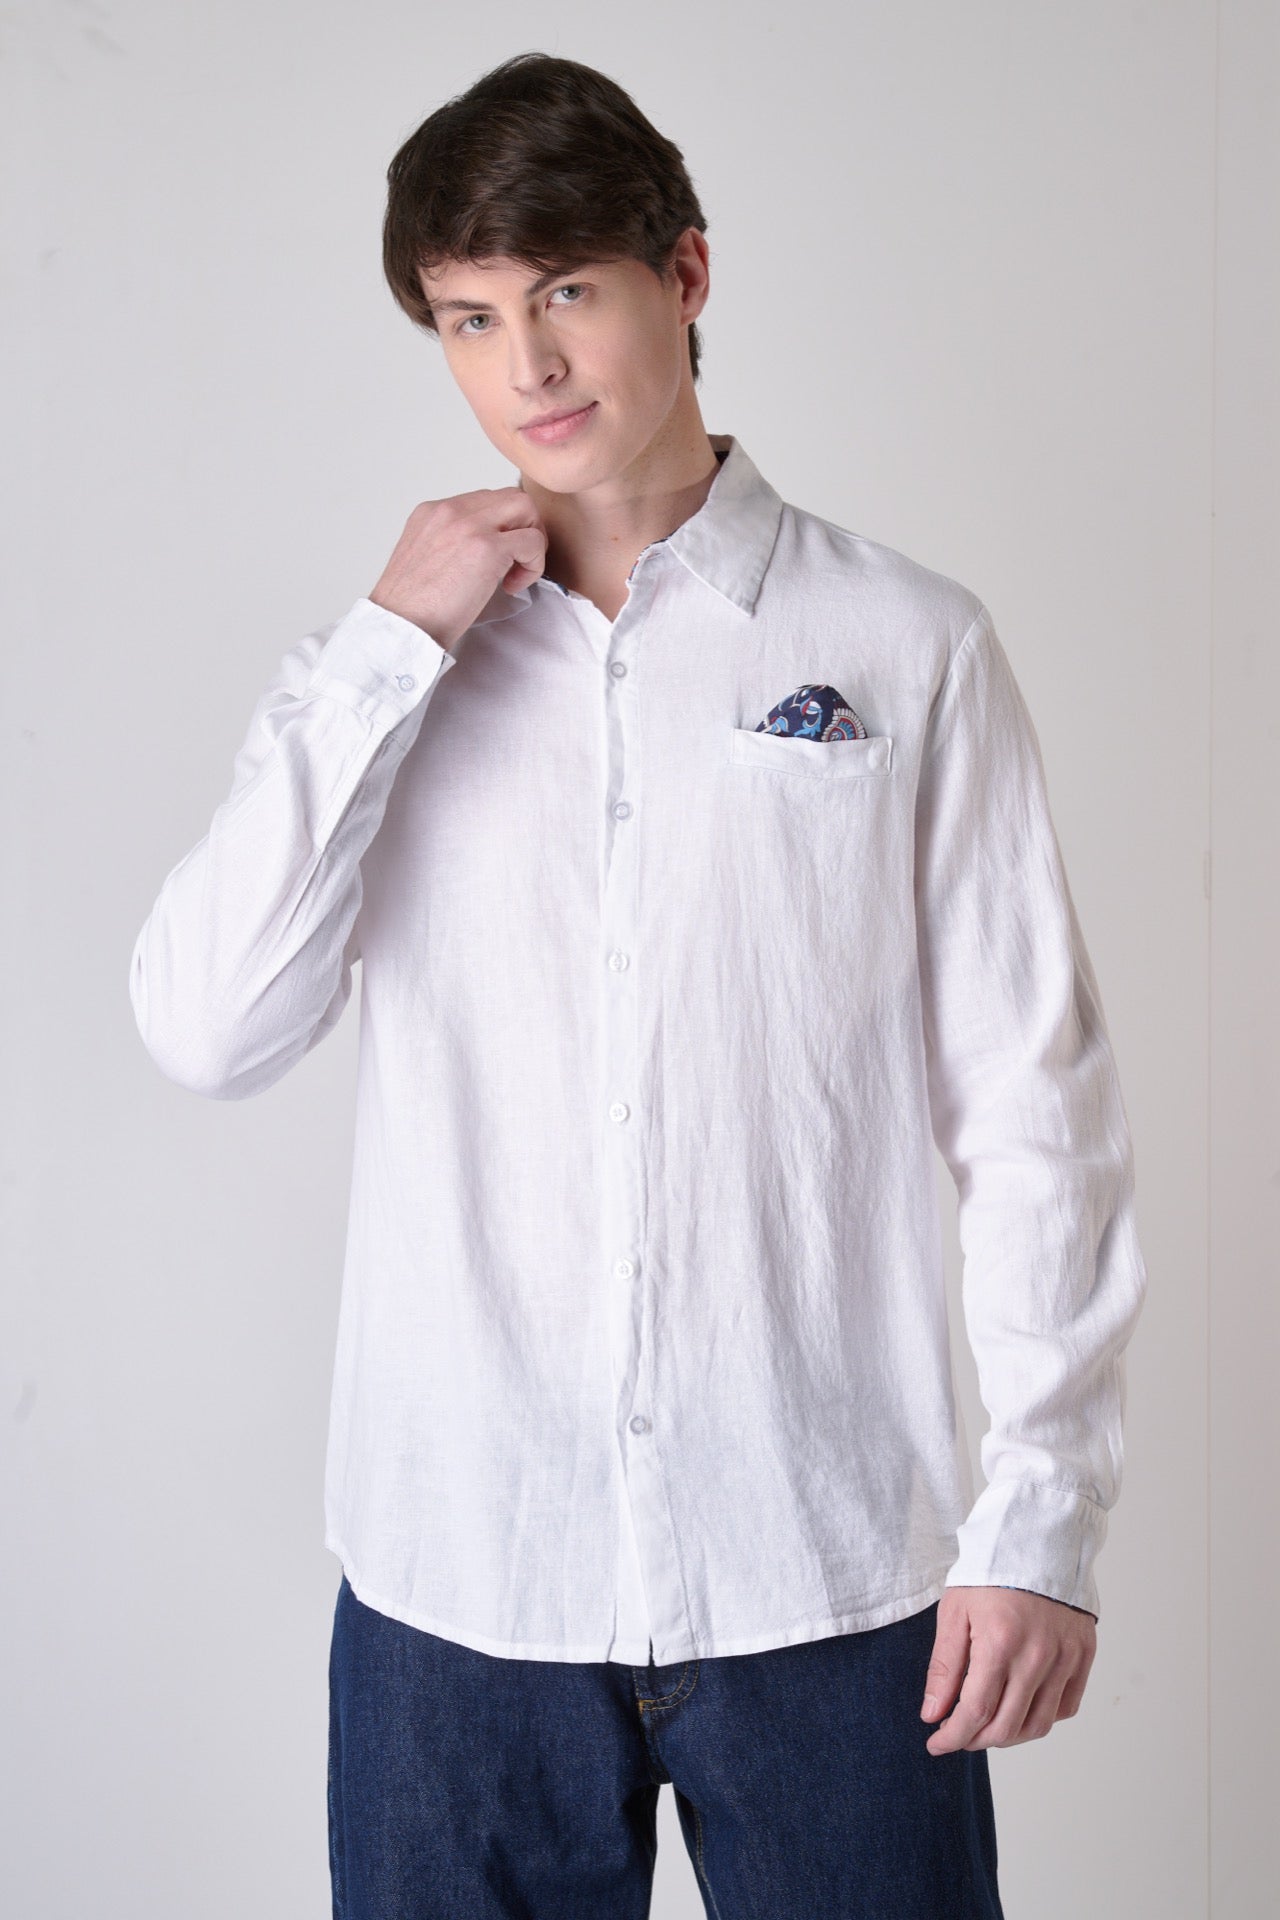 Tailored shirt in white linen with pocket square, interior and cuffs in V2 fabric